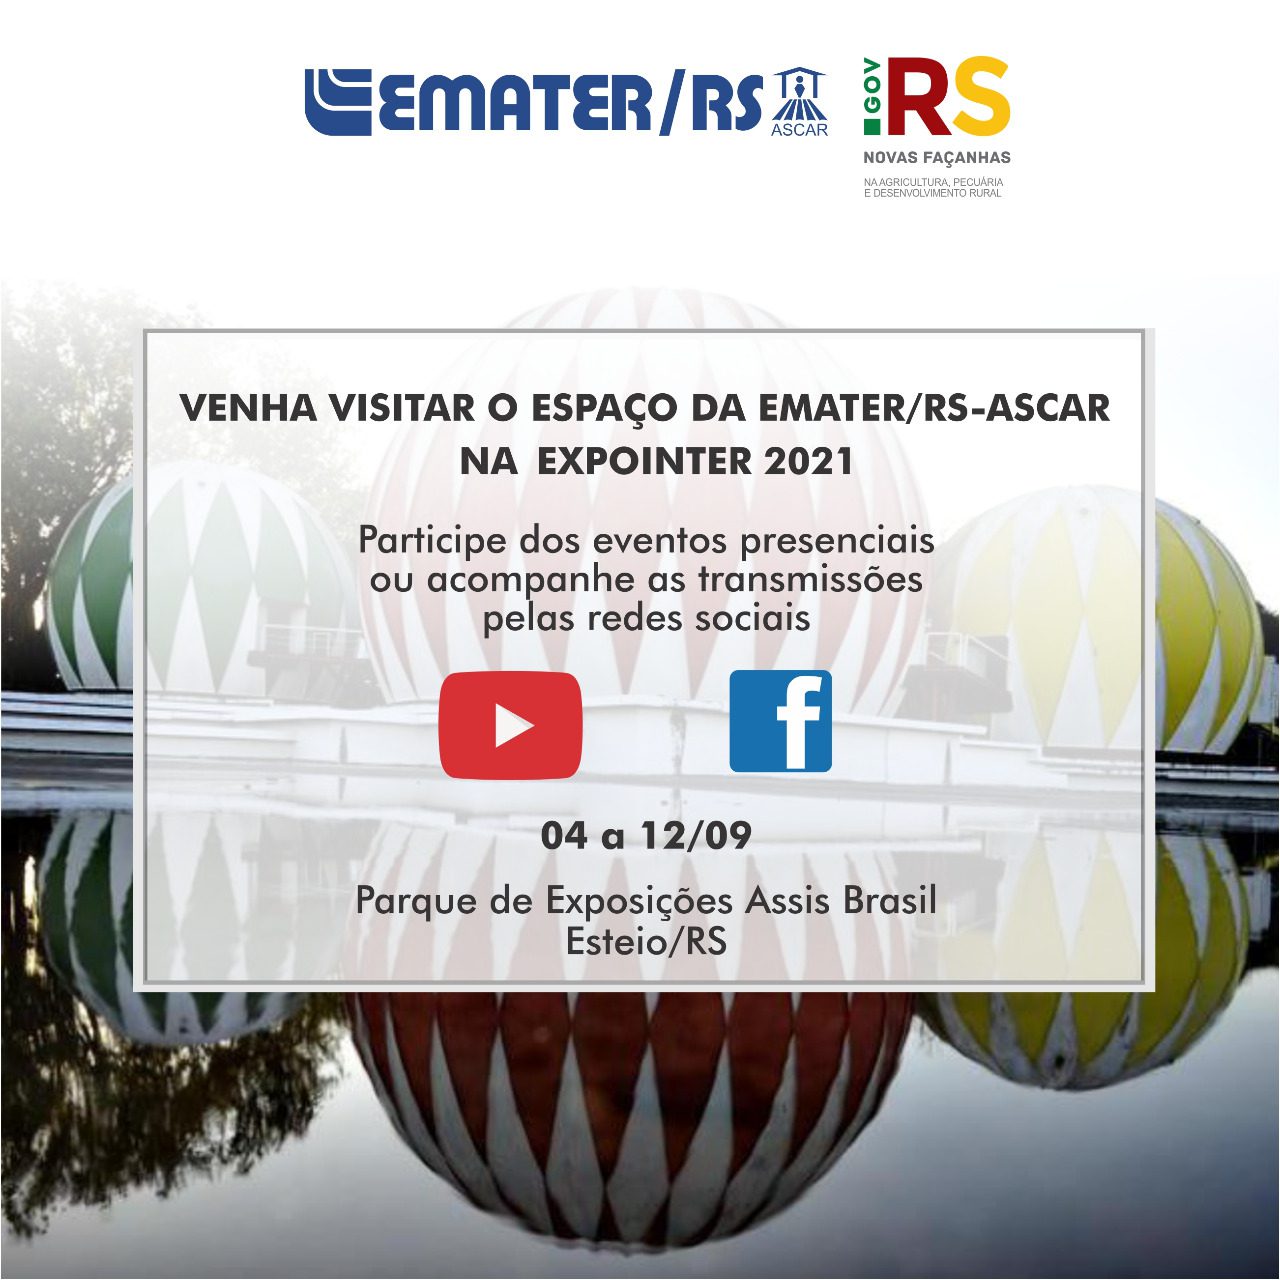 emater expointer 2021 programacao 1